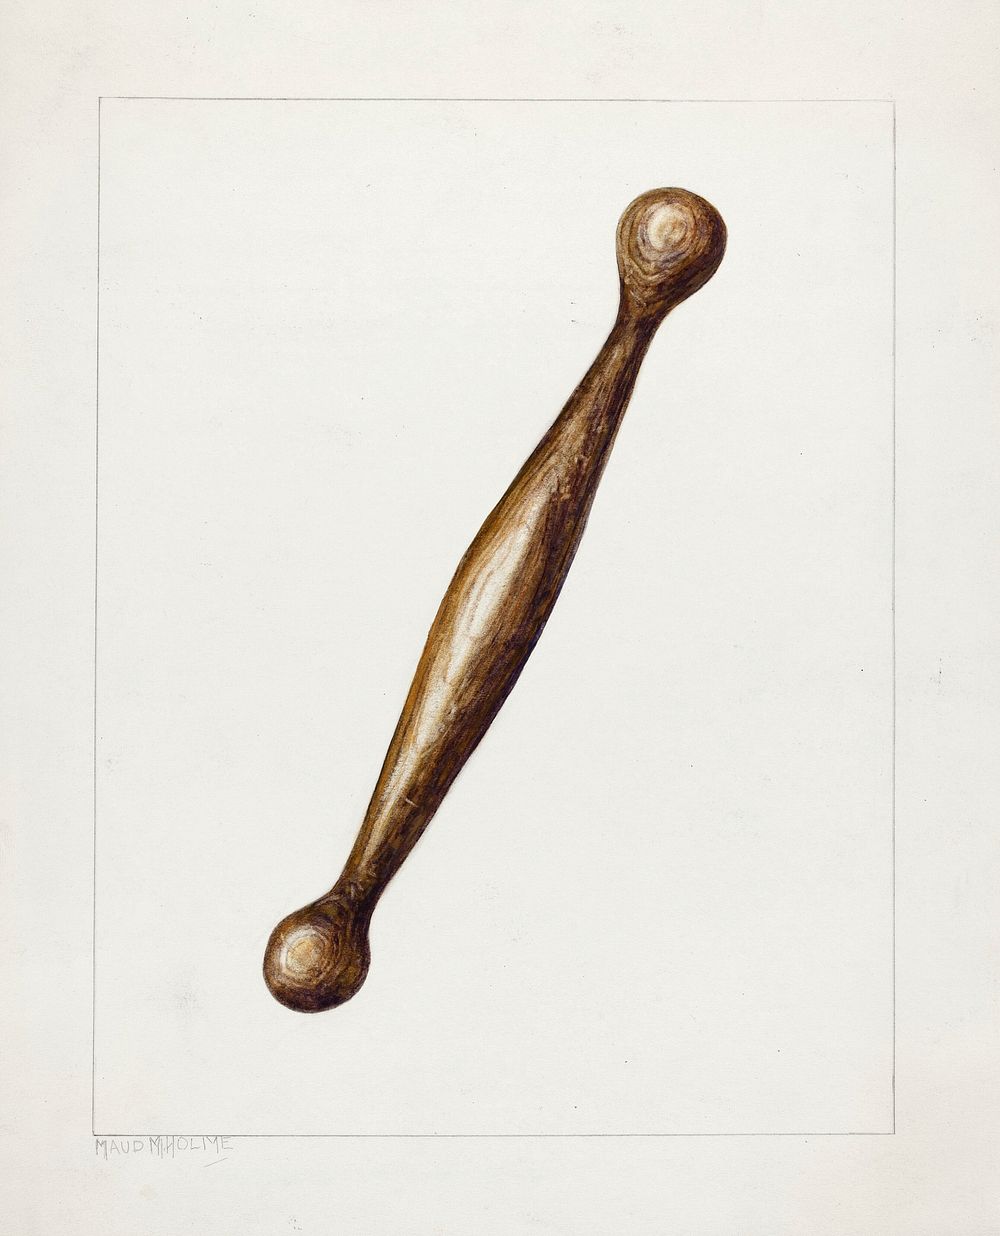 Spinning Stick (ca.1938) by Maud M. Holme. Original from The National Gallery of Art. Digitally enhanced by rawpixel.